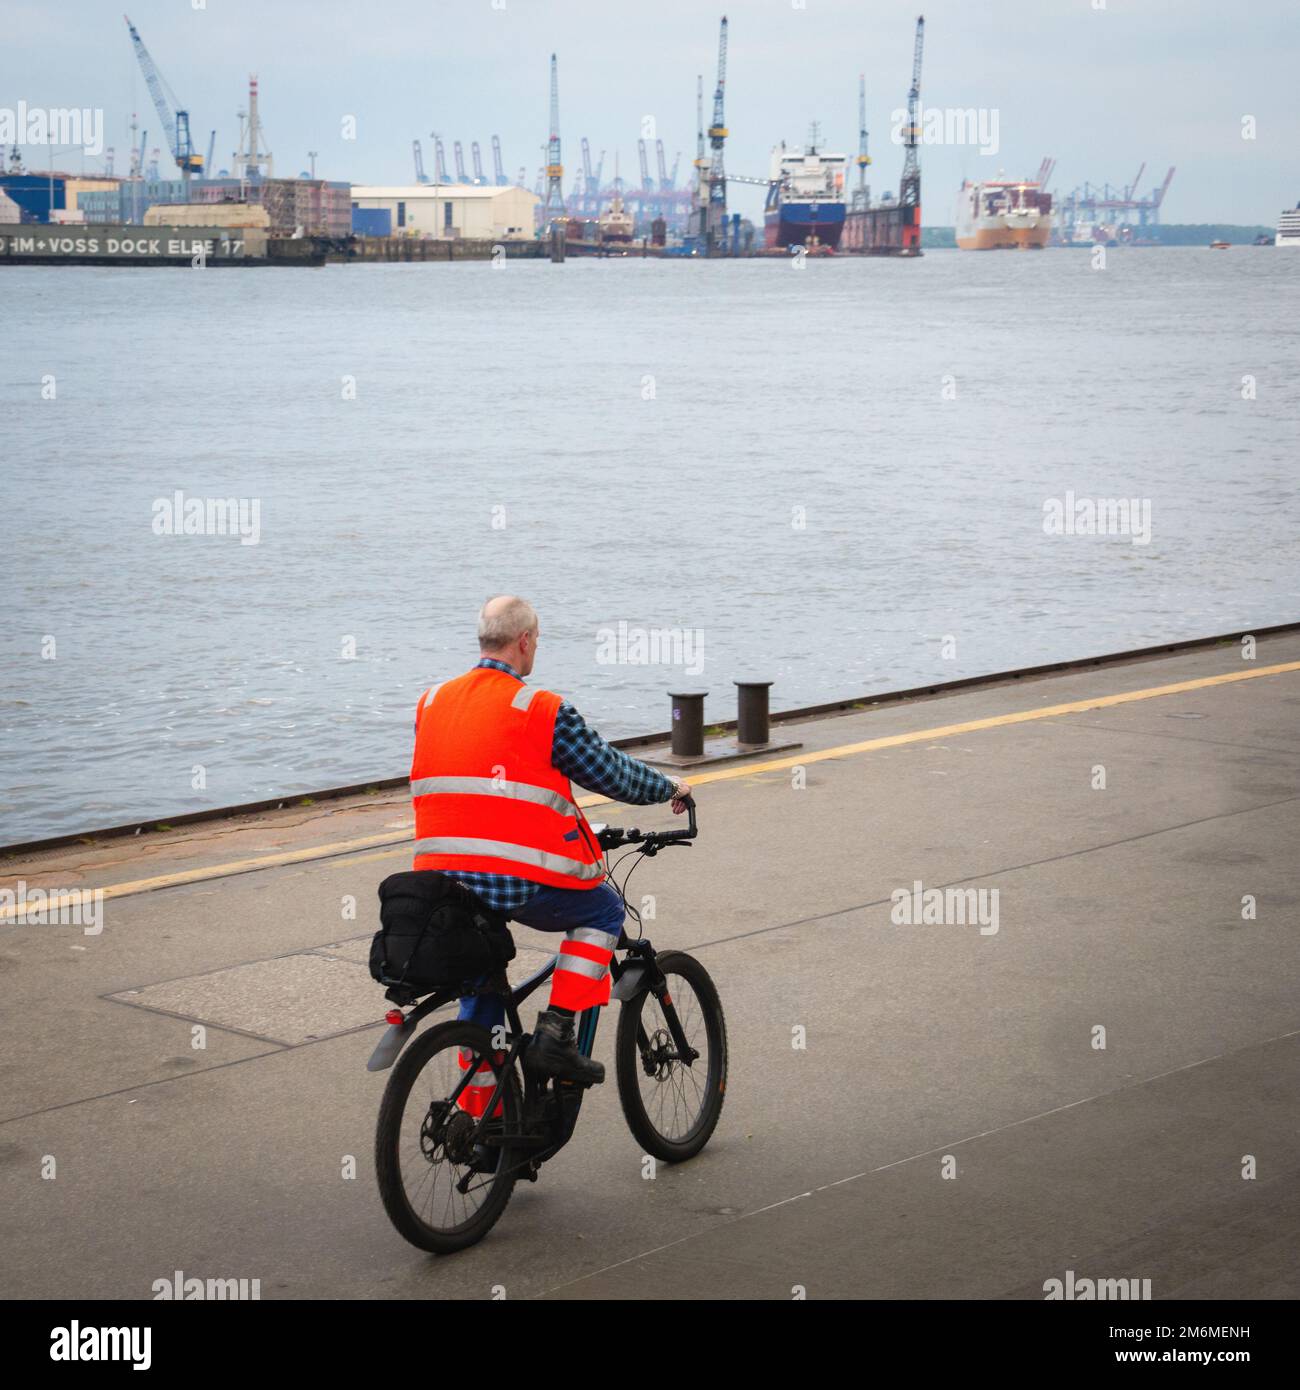 Male worker with reflective jacket at commercial dock Stock Photo